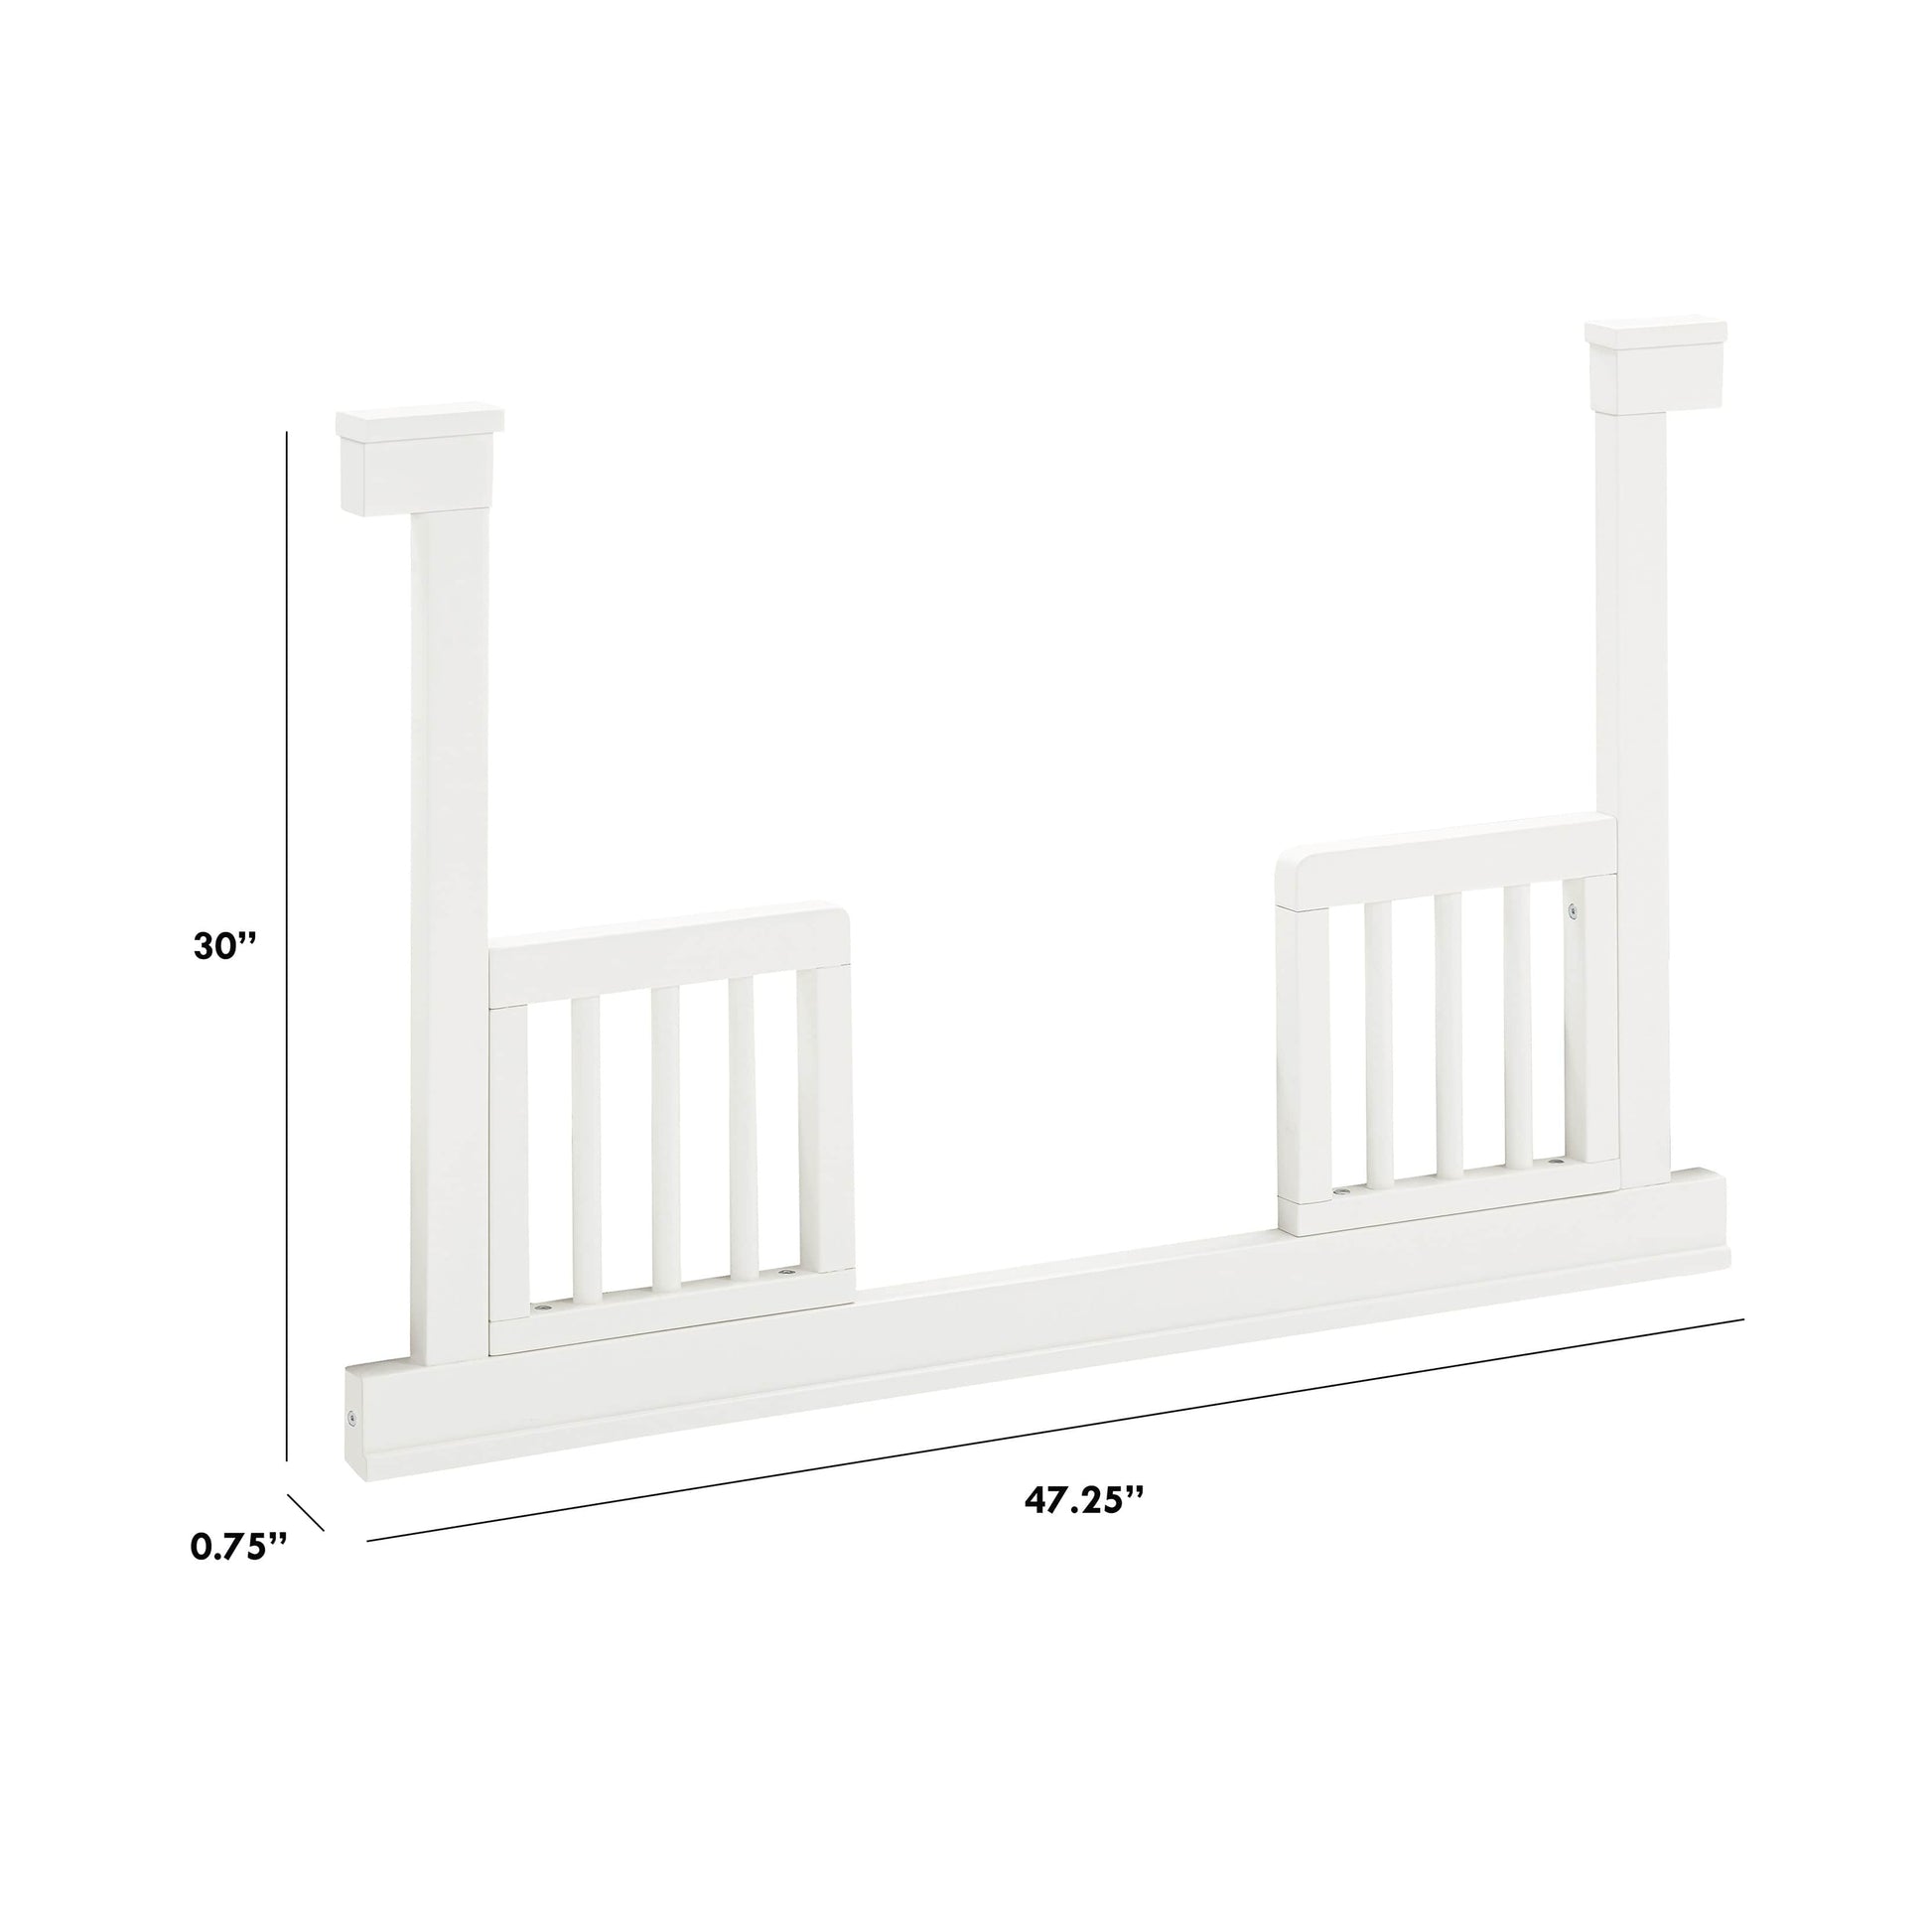 M23799RW,Toddler Bed Conversion Kit for Marin in Warm White